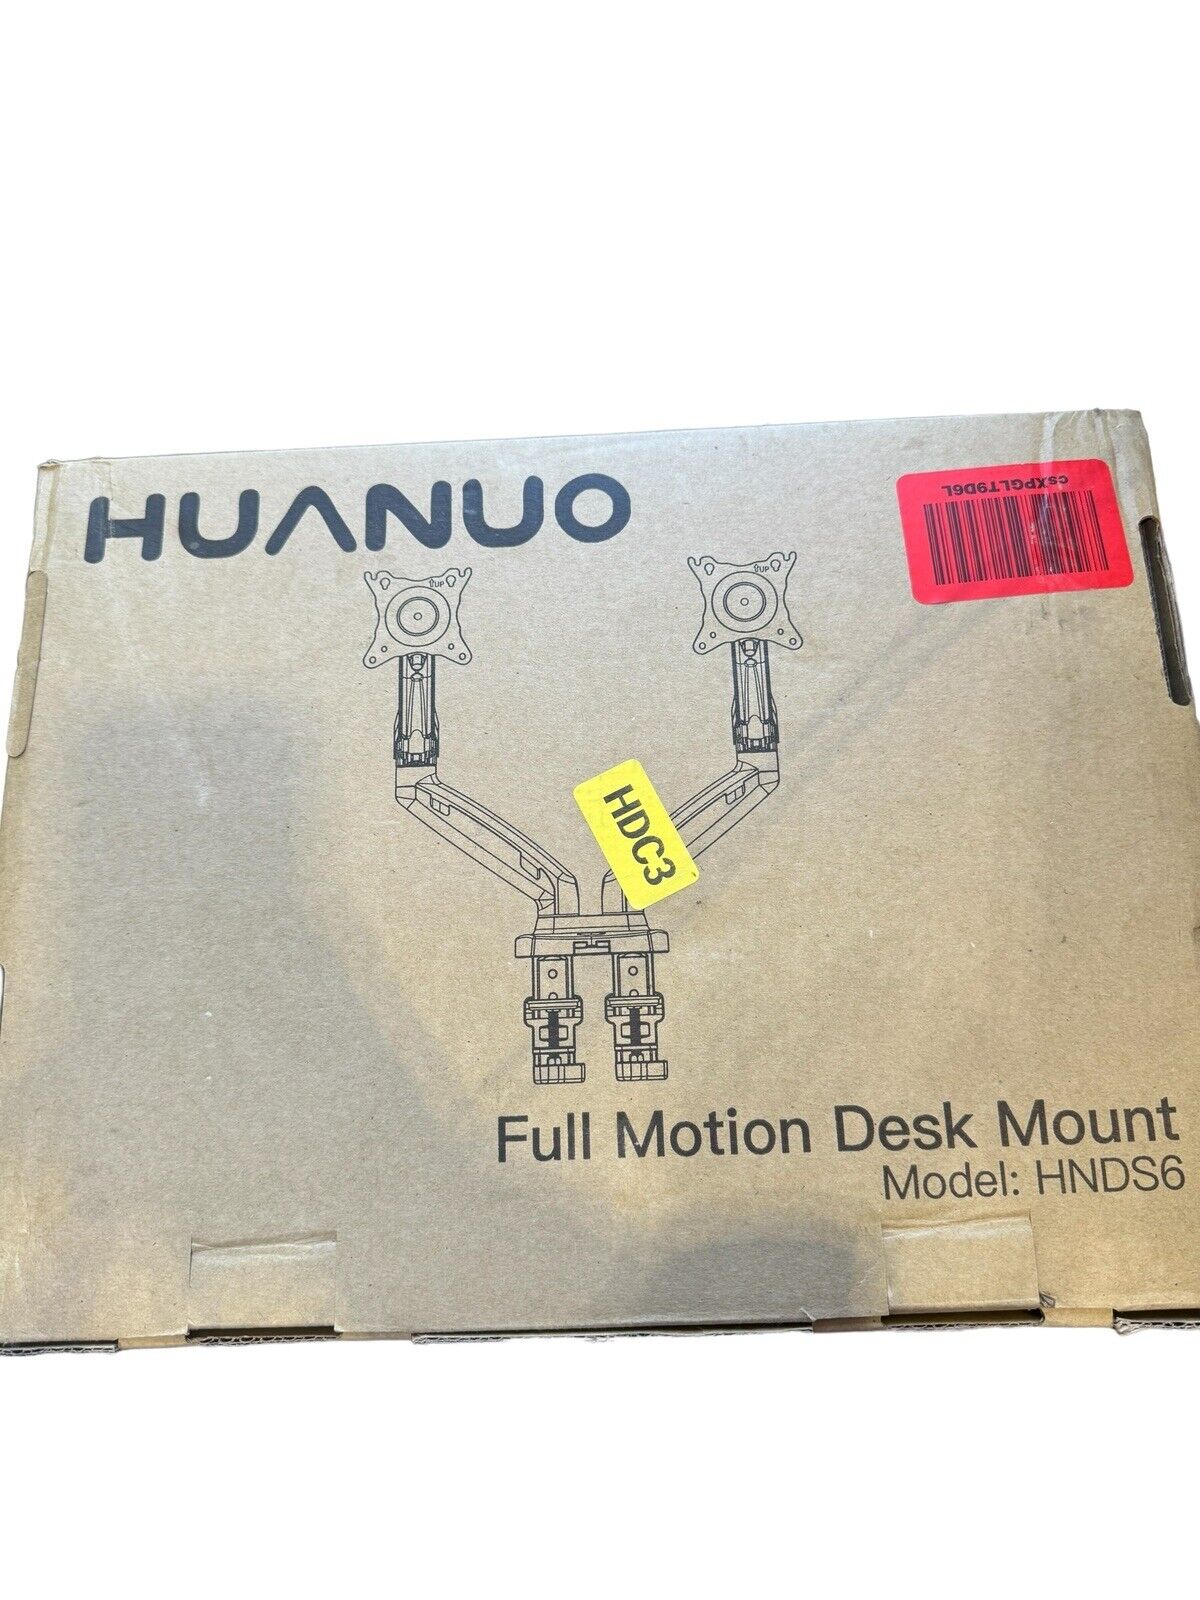 HUANUO HNDS6 Dual Monitor Stand Full Motion Desk Mount Black